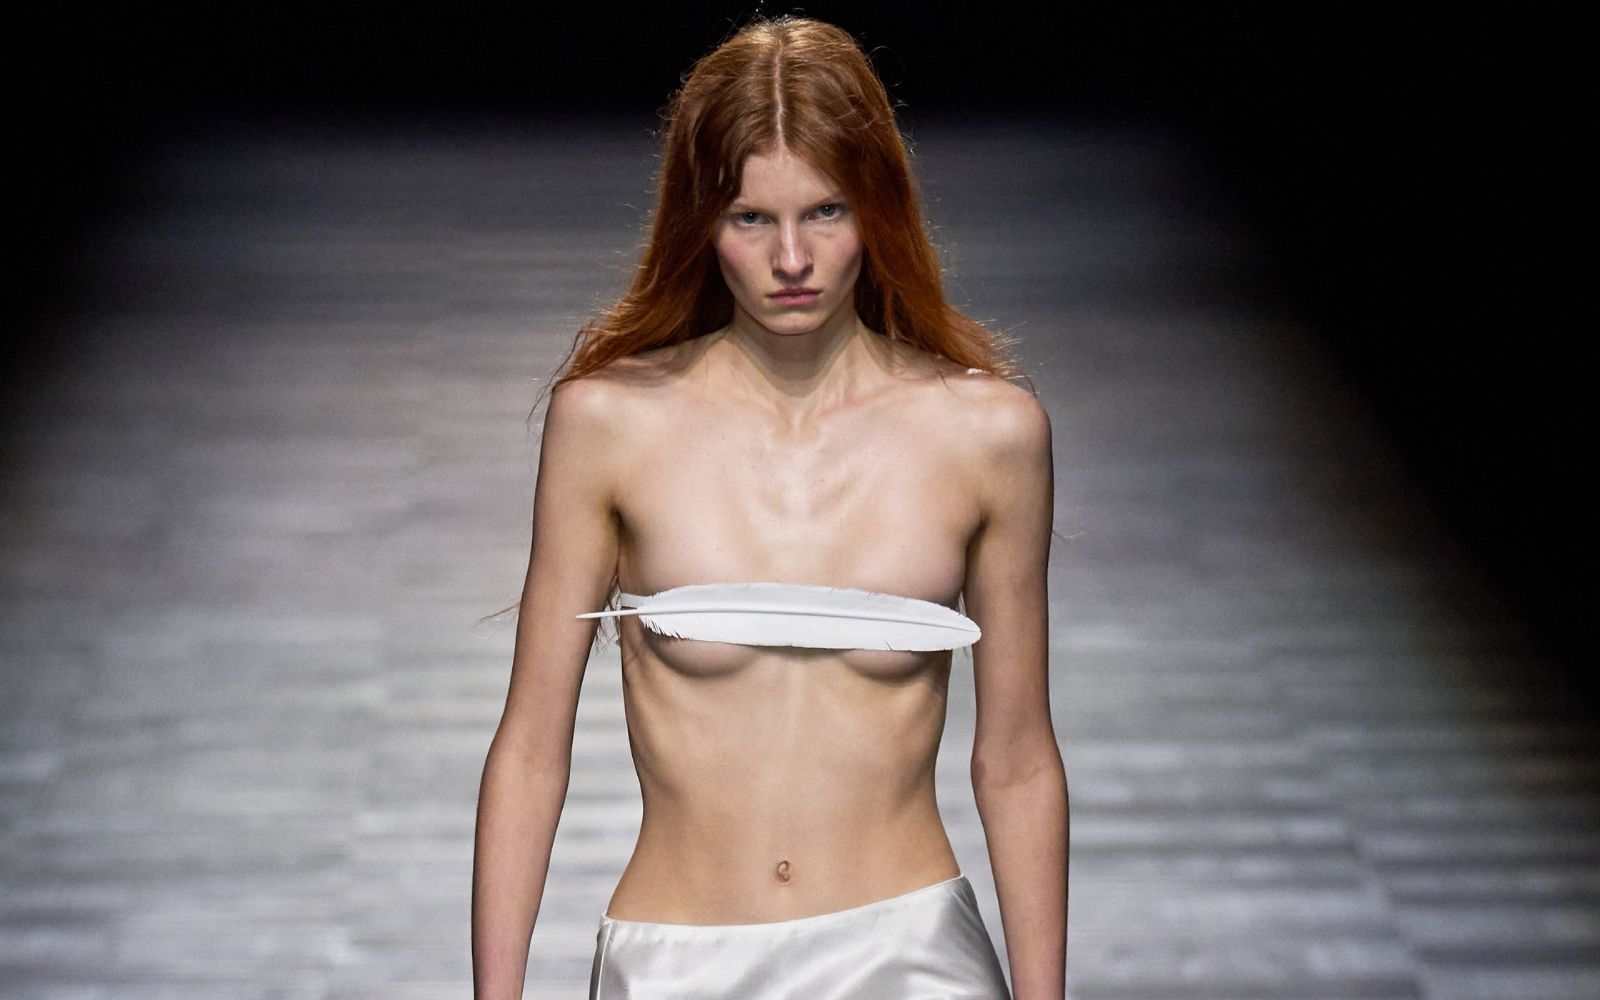 Bralettes Are Trending, According to the Runways, No Shirt, No